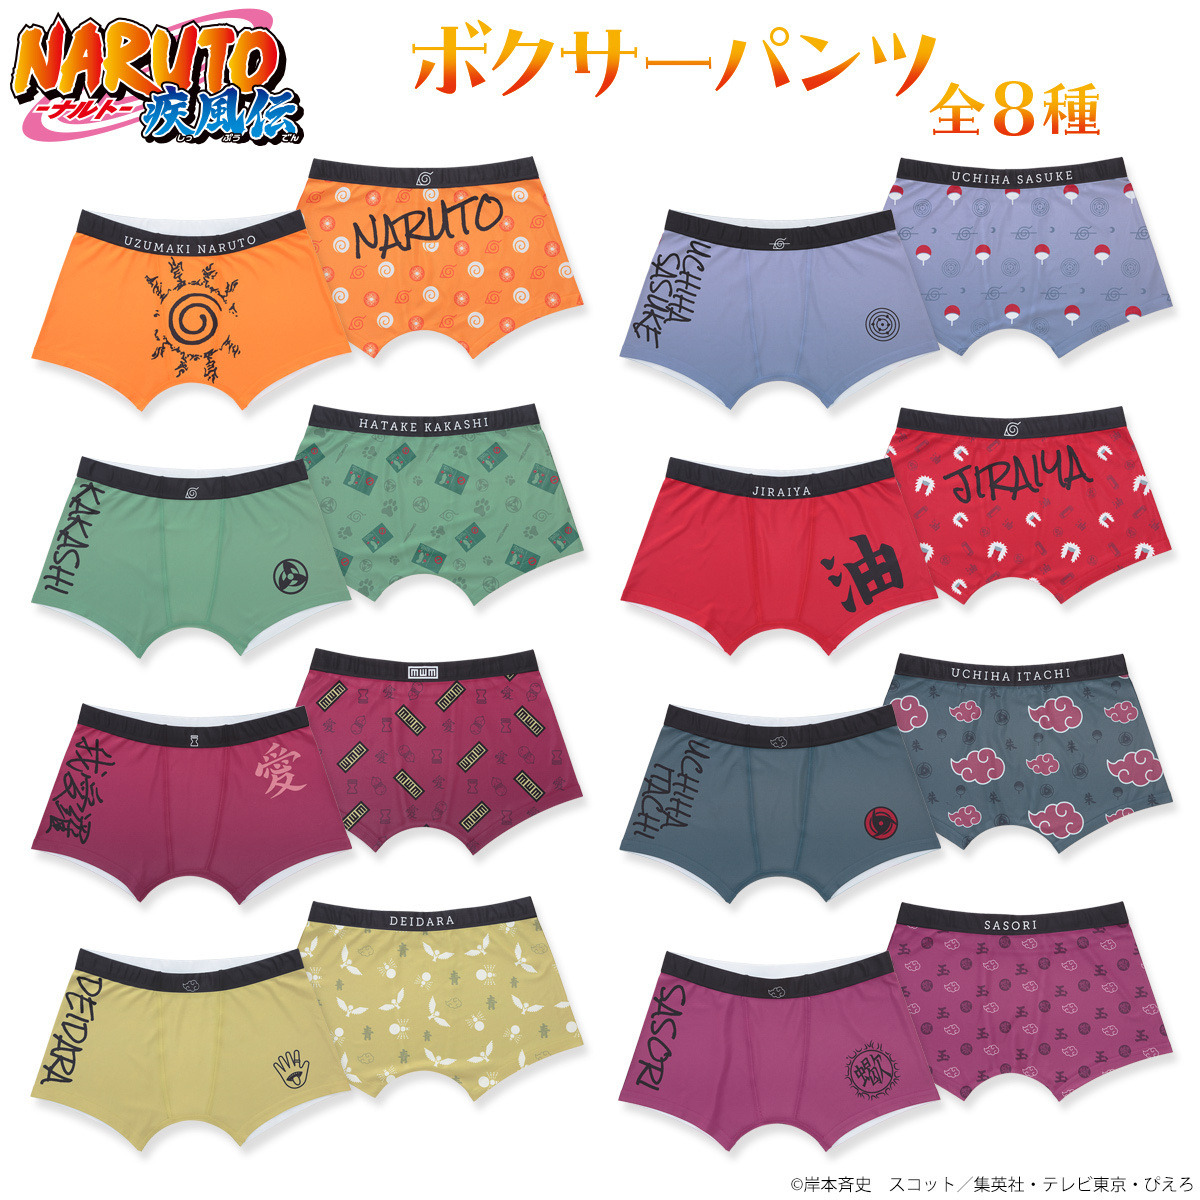 new naruto underwear to seal your cock!